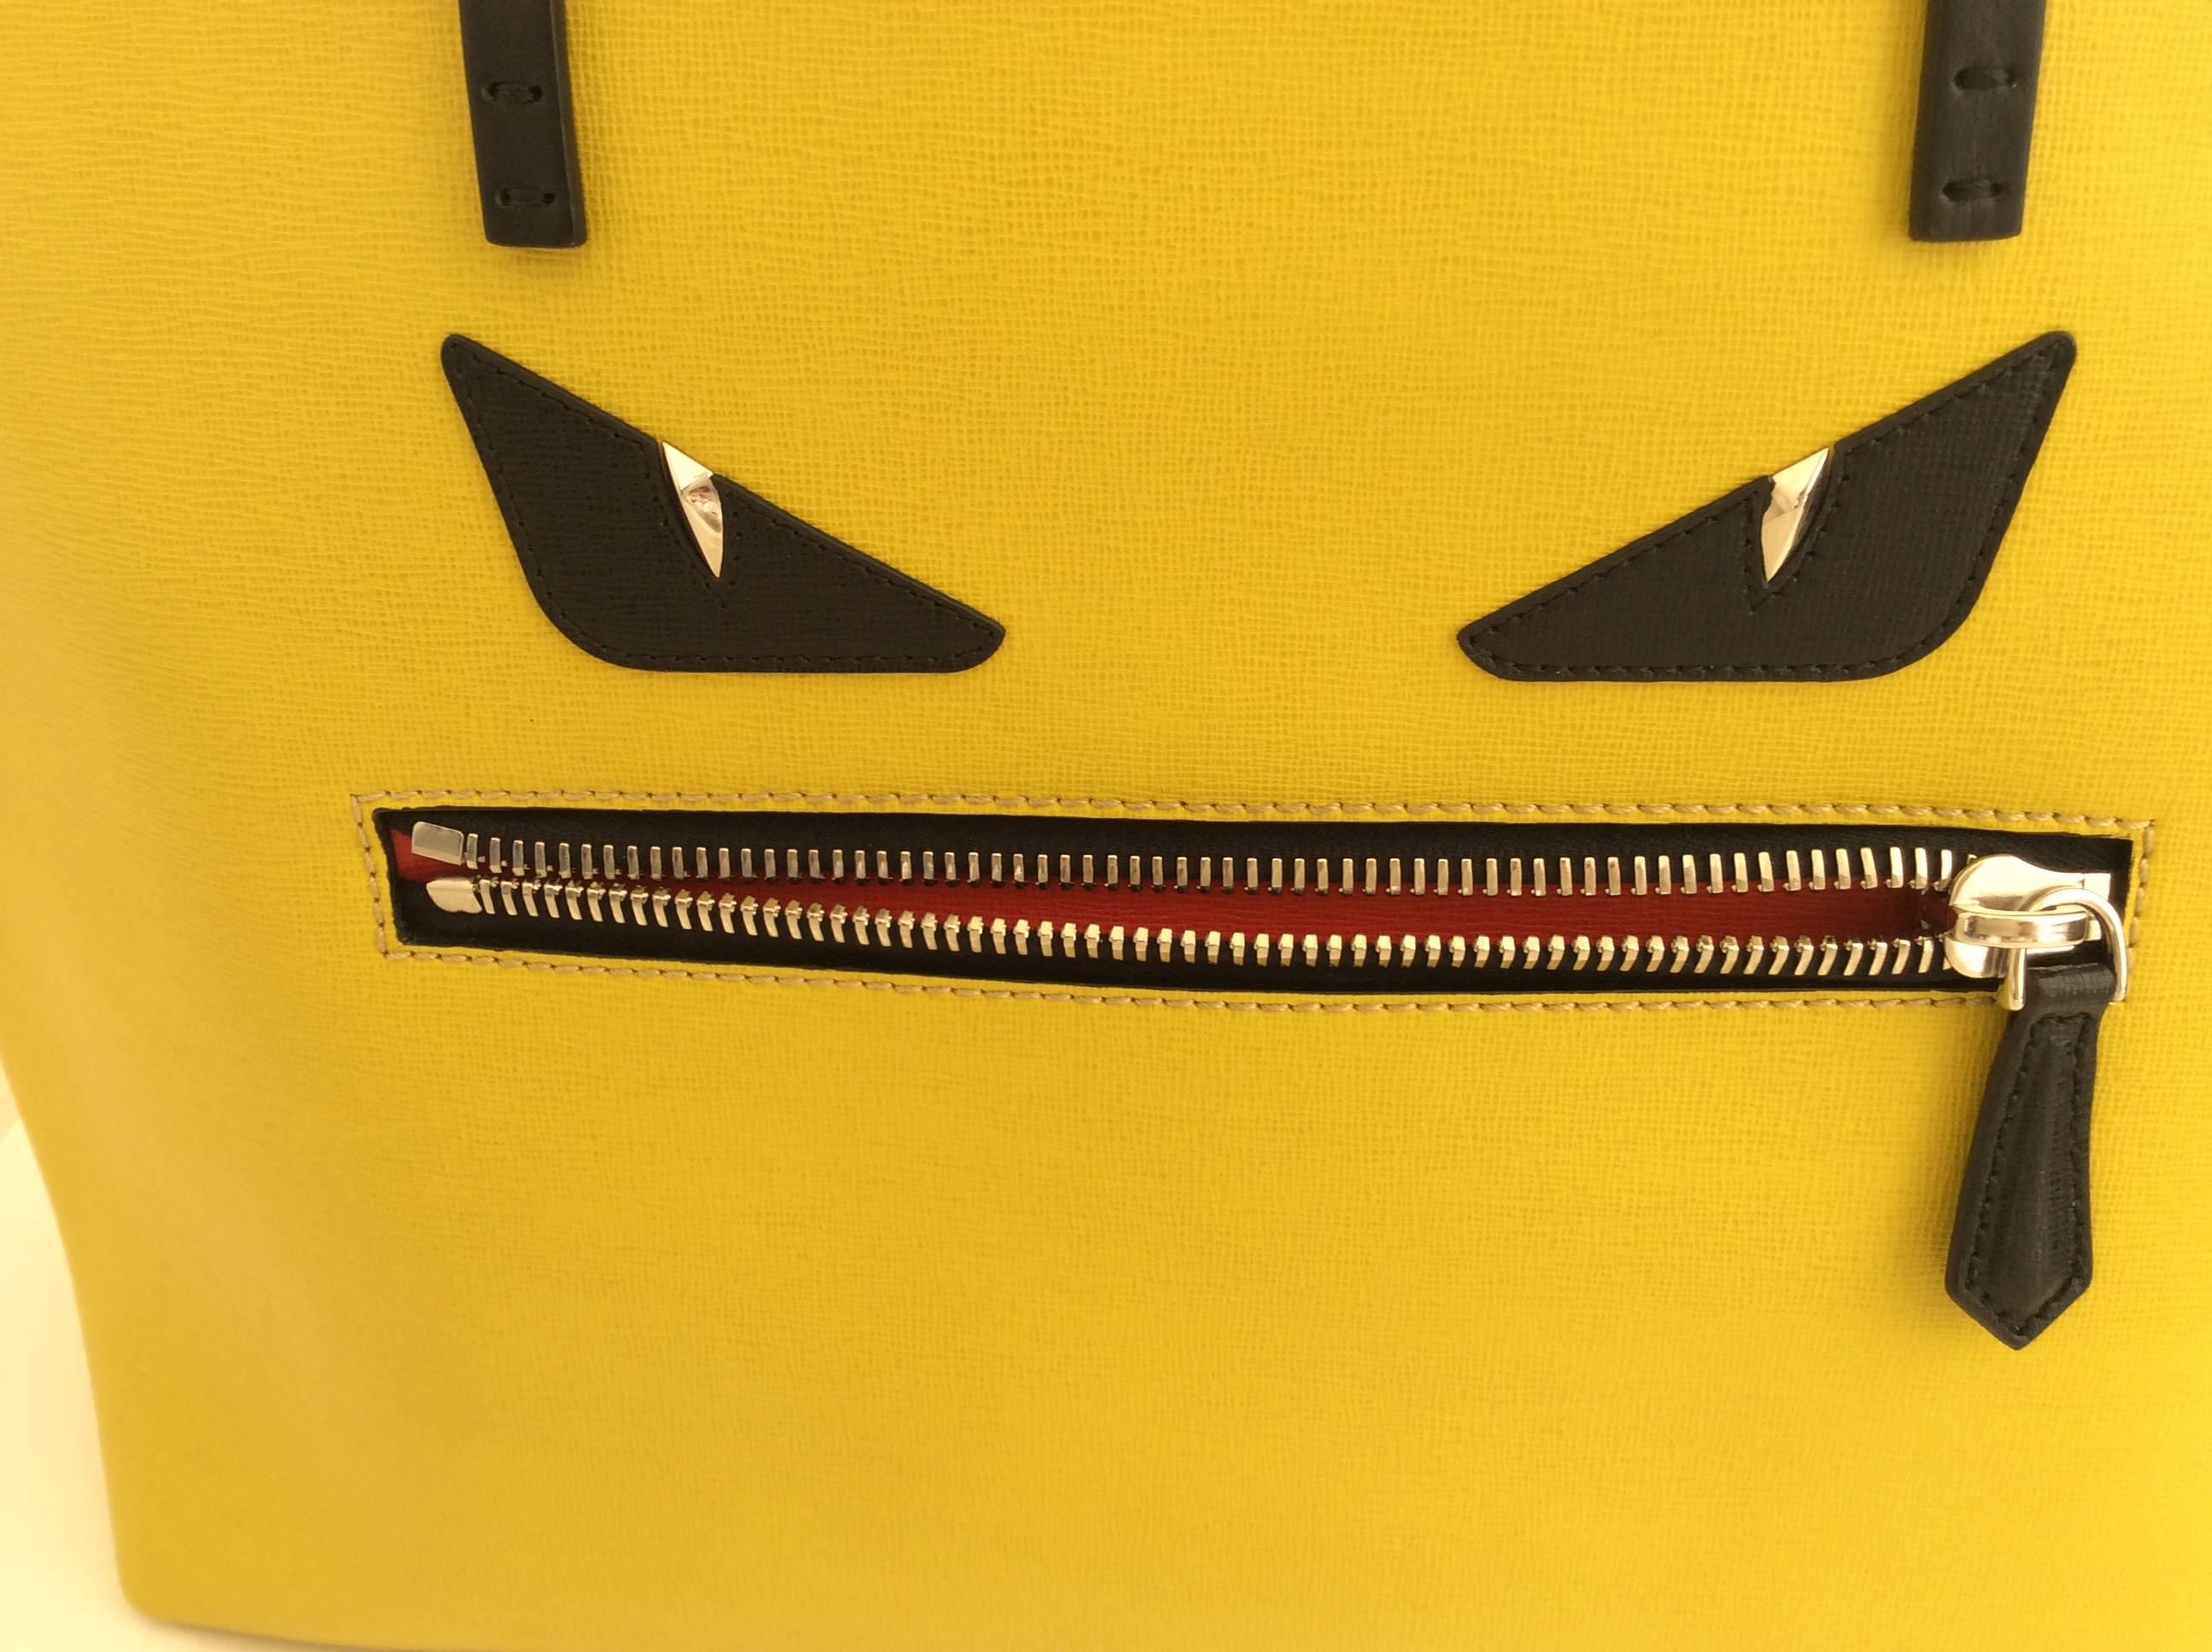 Fendi medium Monster Roll tote in yellow leather with two black leather shoulder straps (9.5” drop). Two black leather eyes and a black surrounded zipper pocket - lined in red - create the ‘monster’ face. The interior is lined in black fabric and